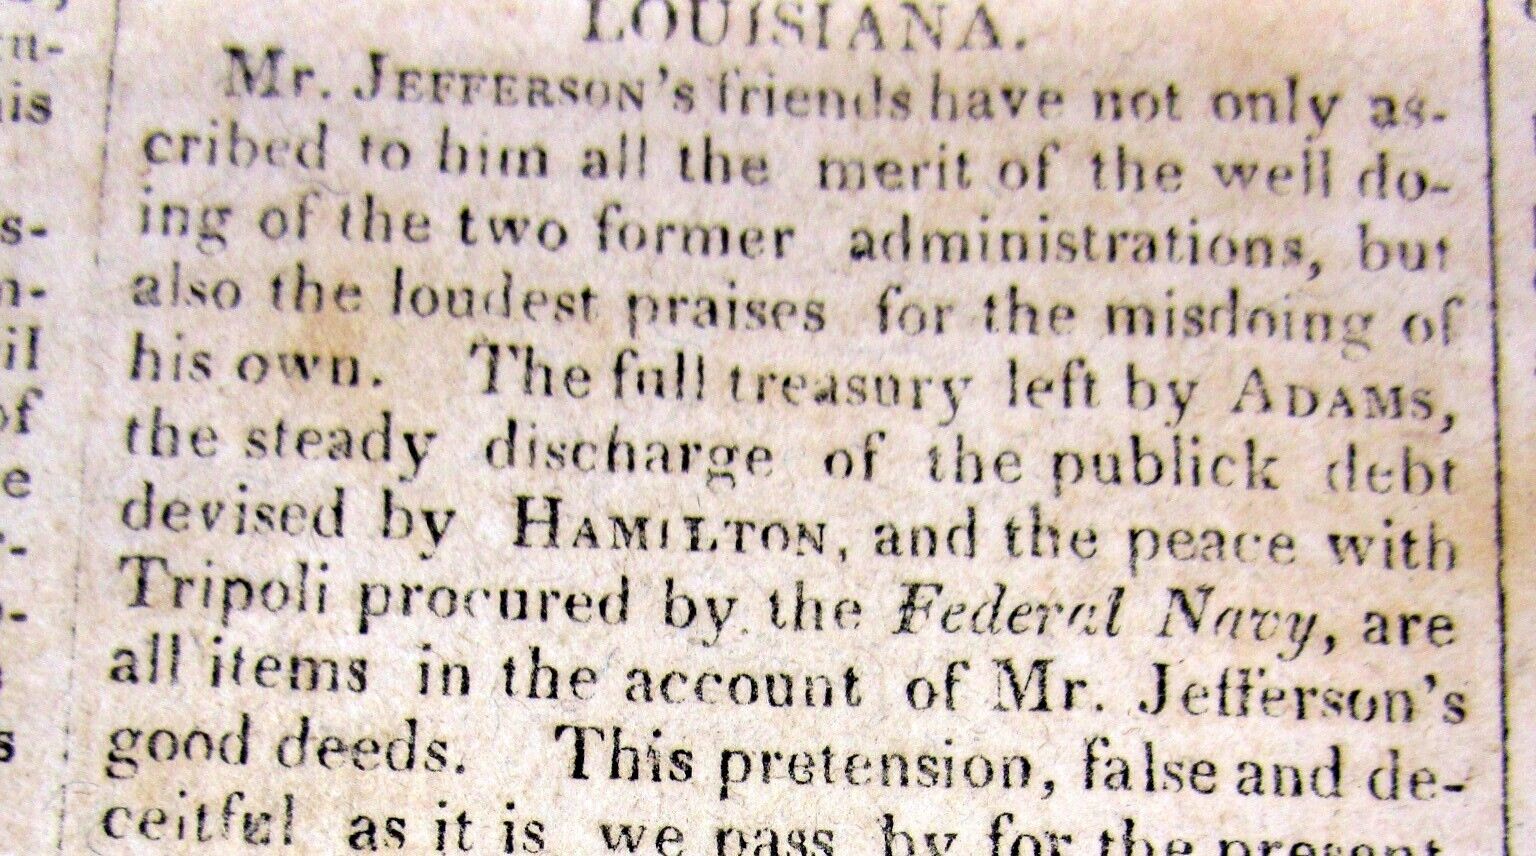 1806 newspaper w LOUISIANA PURCHASE by PRES THOMAS JEFFERSON explained in detail